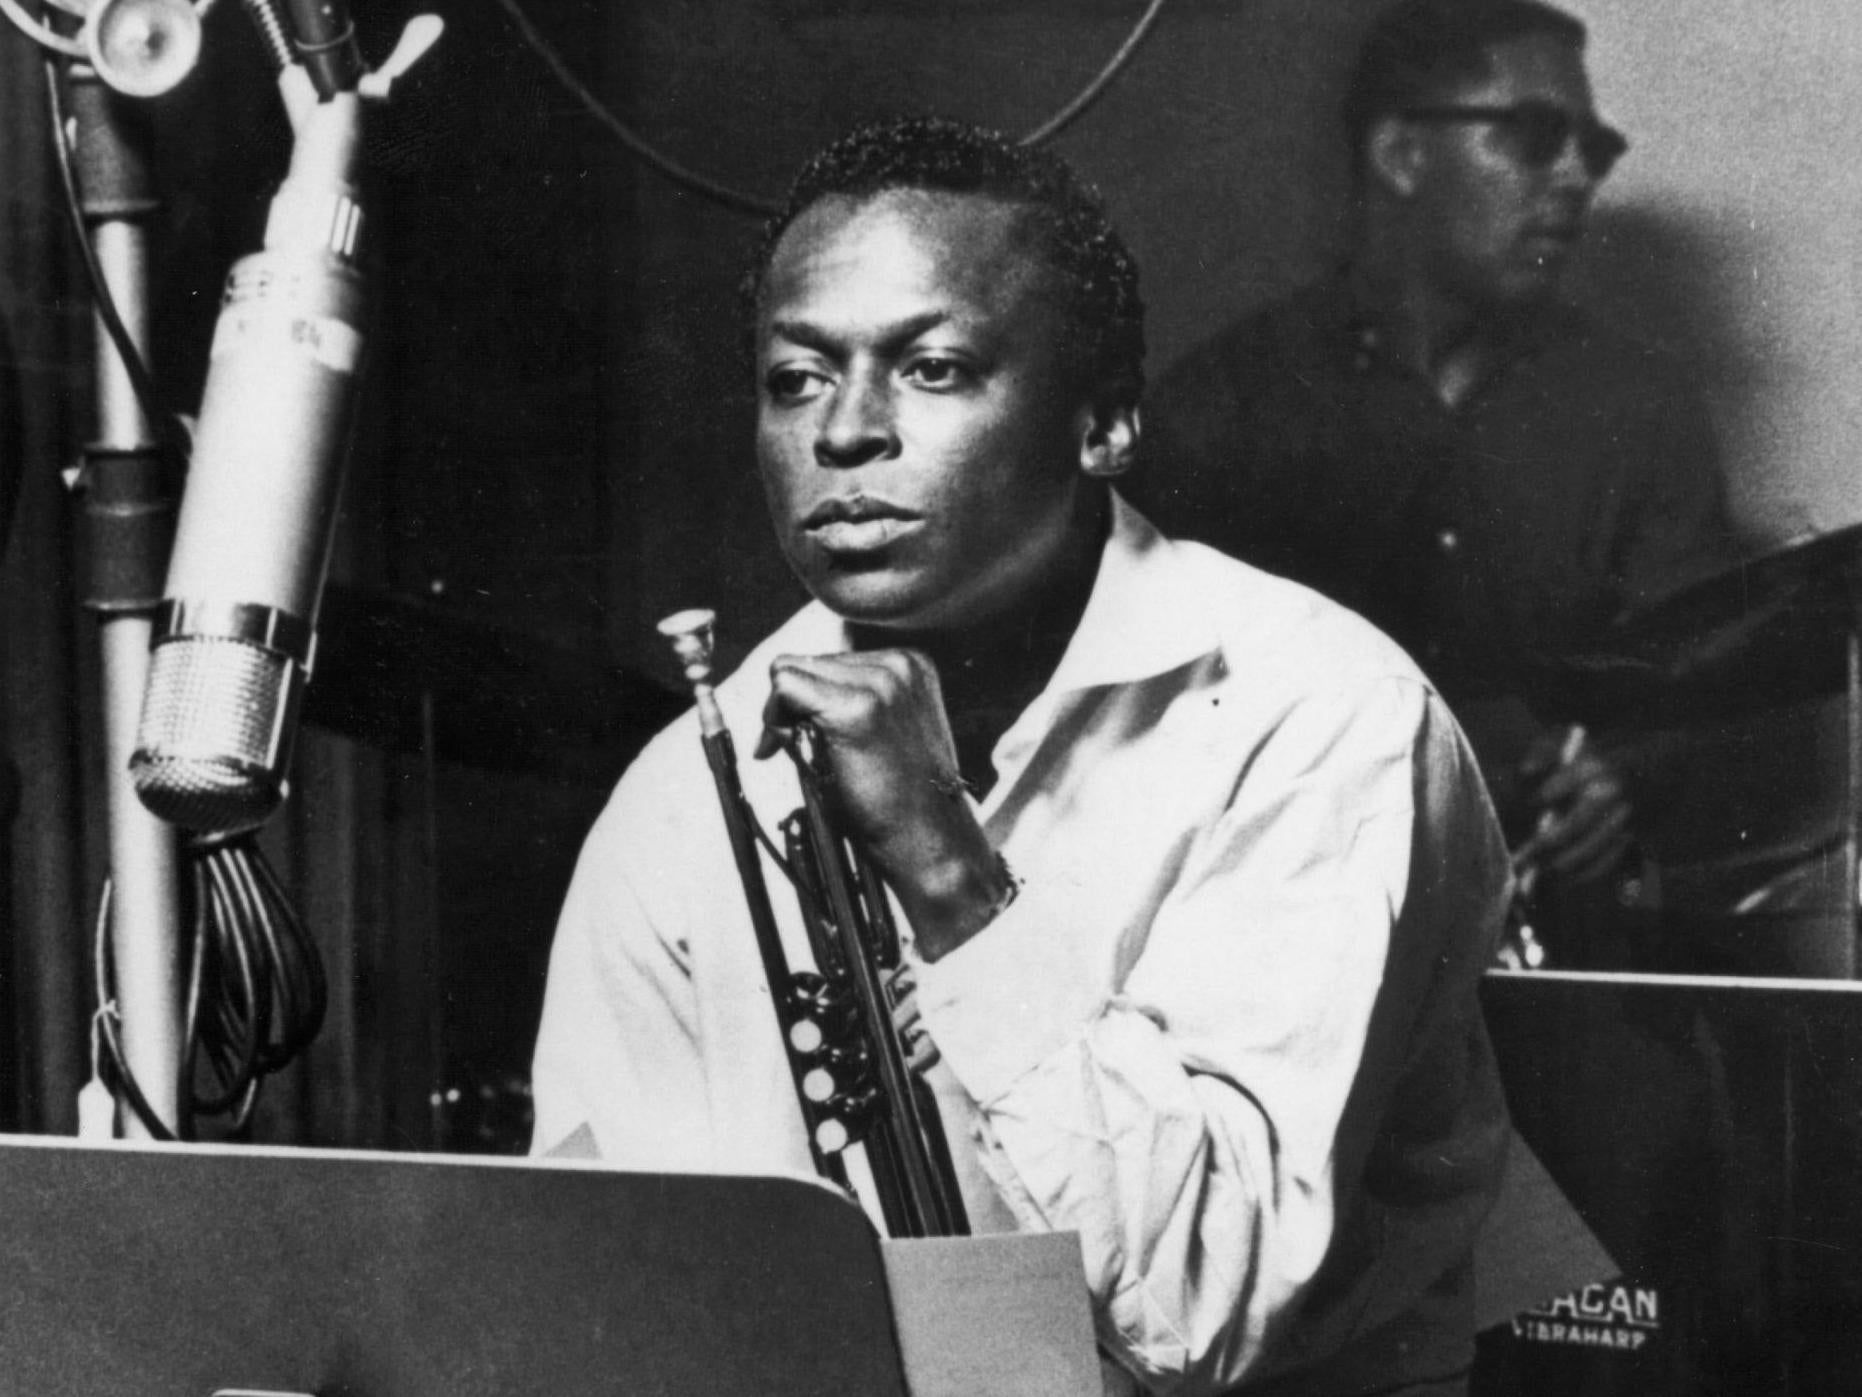 Kind Of Blue The Jazz Album By Miles Davis That Transformed Music The Independent The Independent